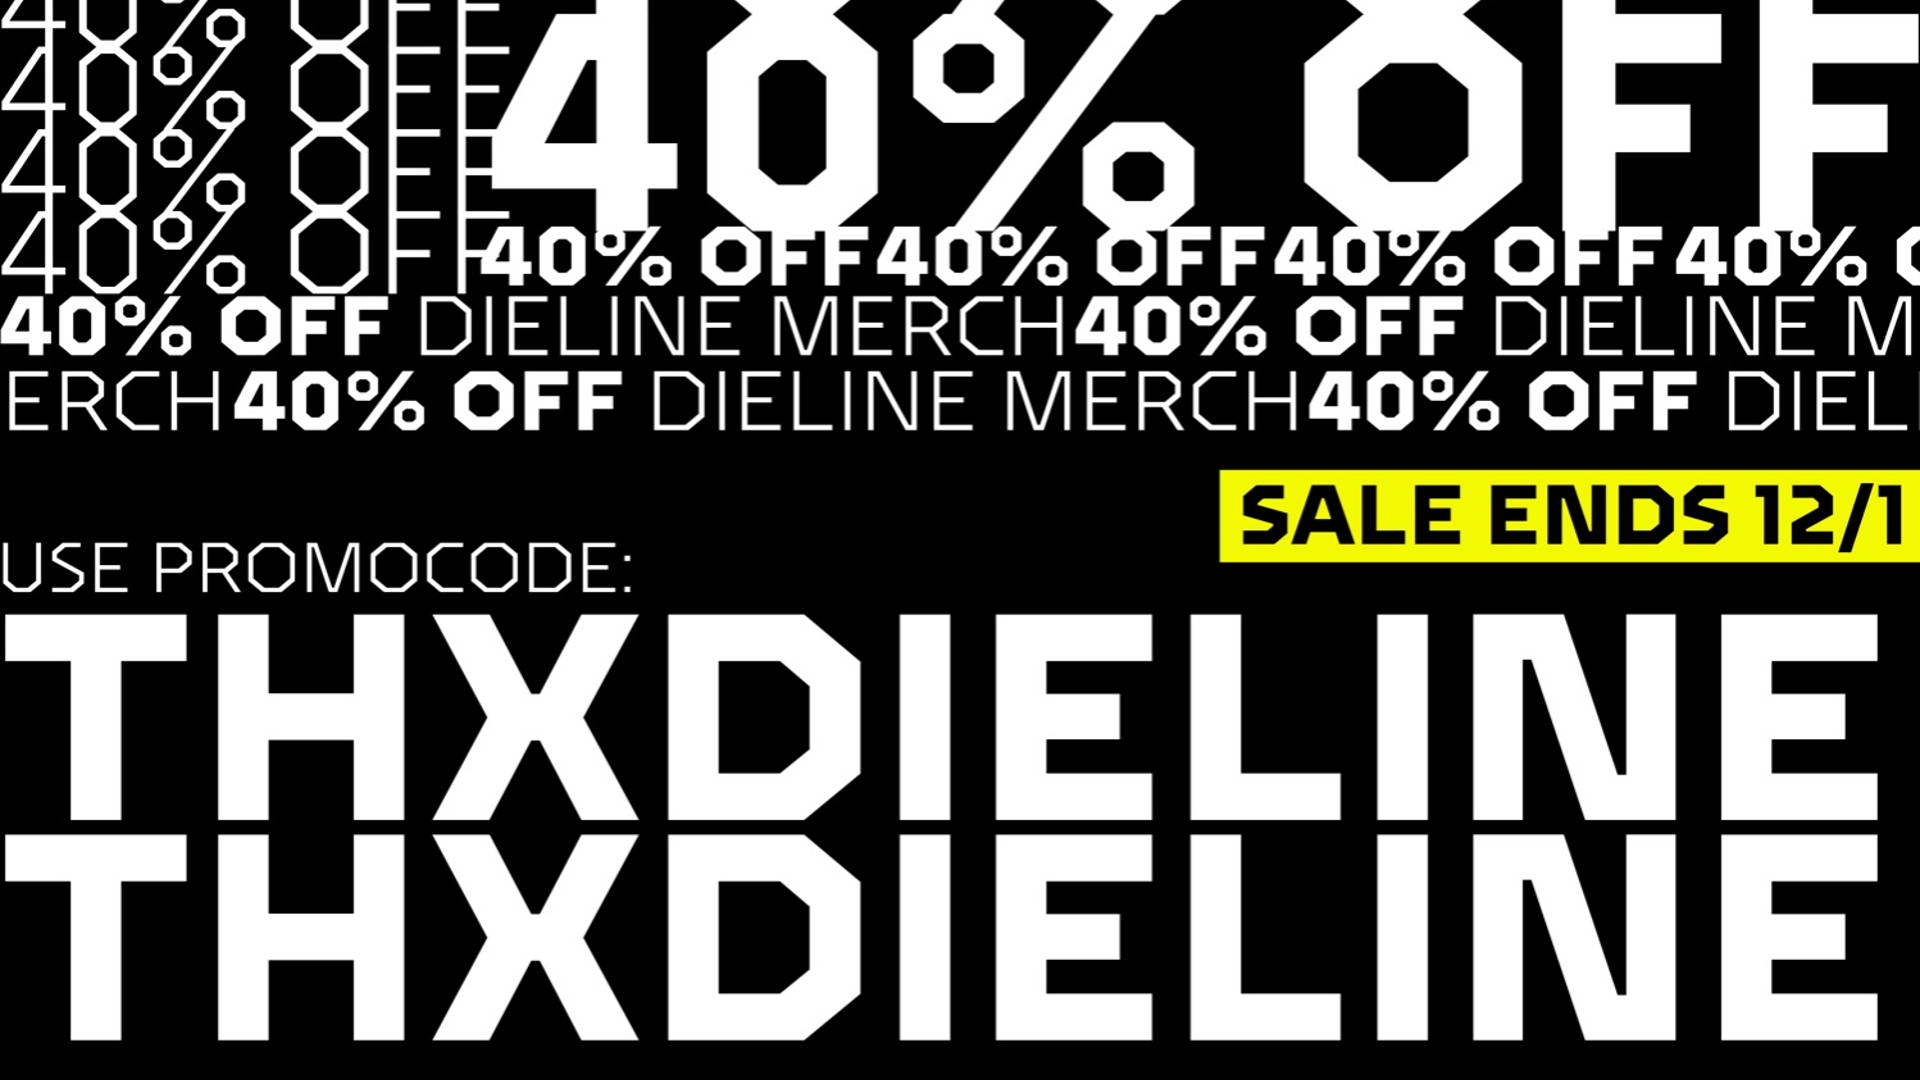 Featured image for Black Friday SALE STARTS NOW: DIELINE MERCH 40% OFF